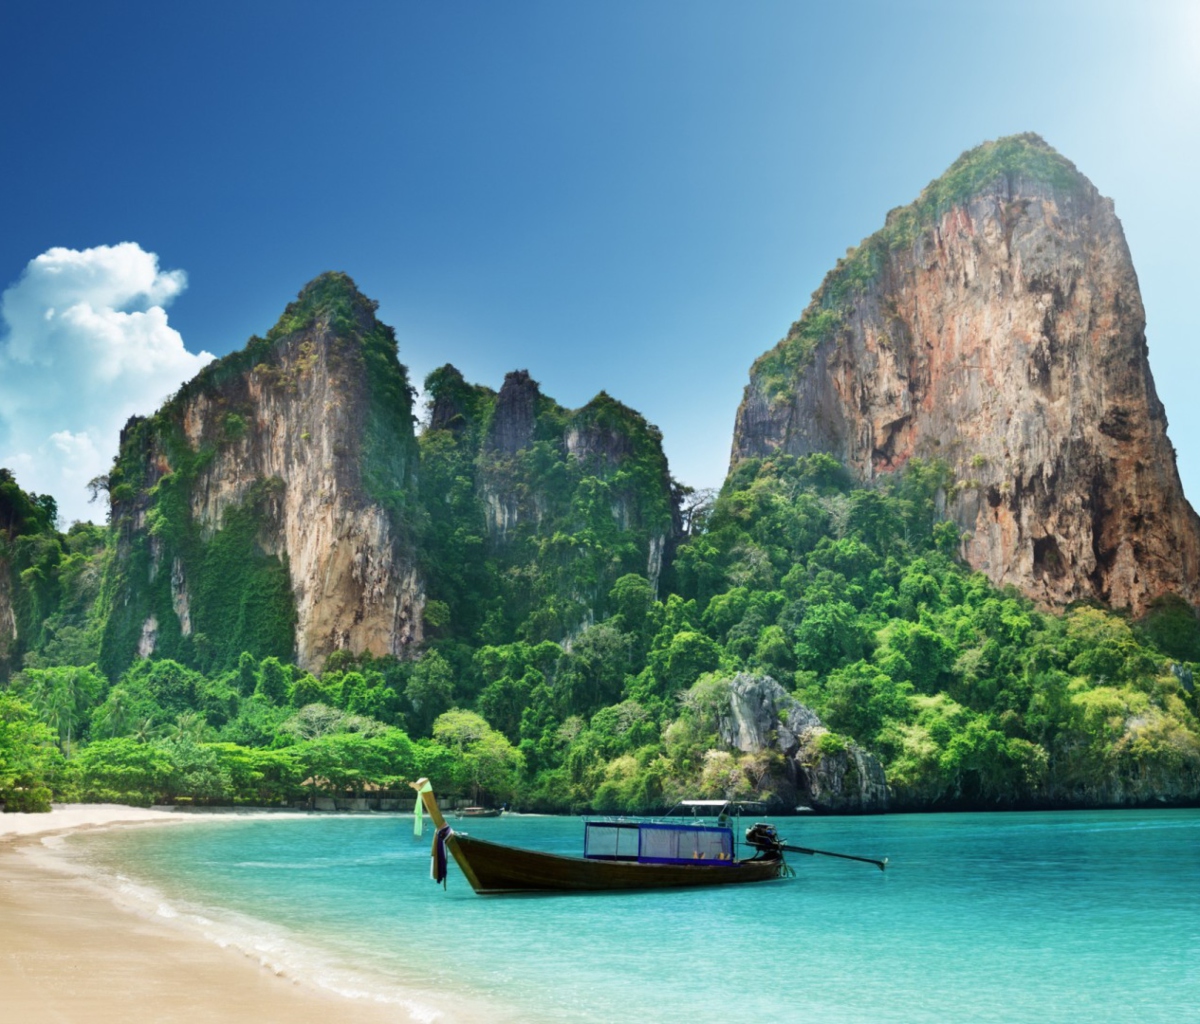 Das Boat And Rocks In Thailand Wallpaper 1200x1024